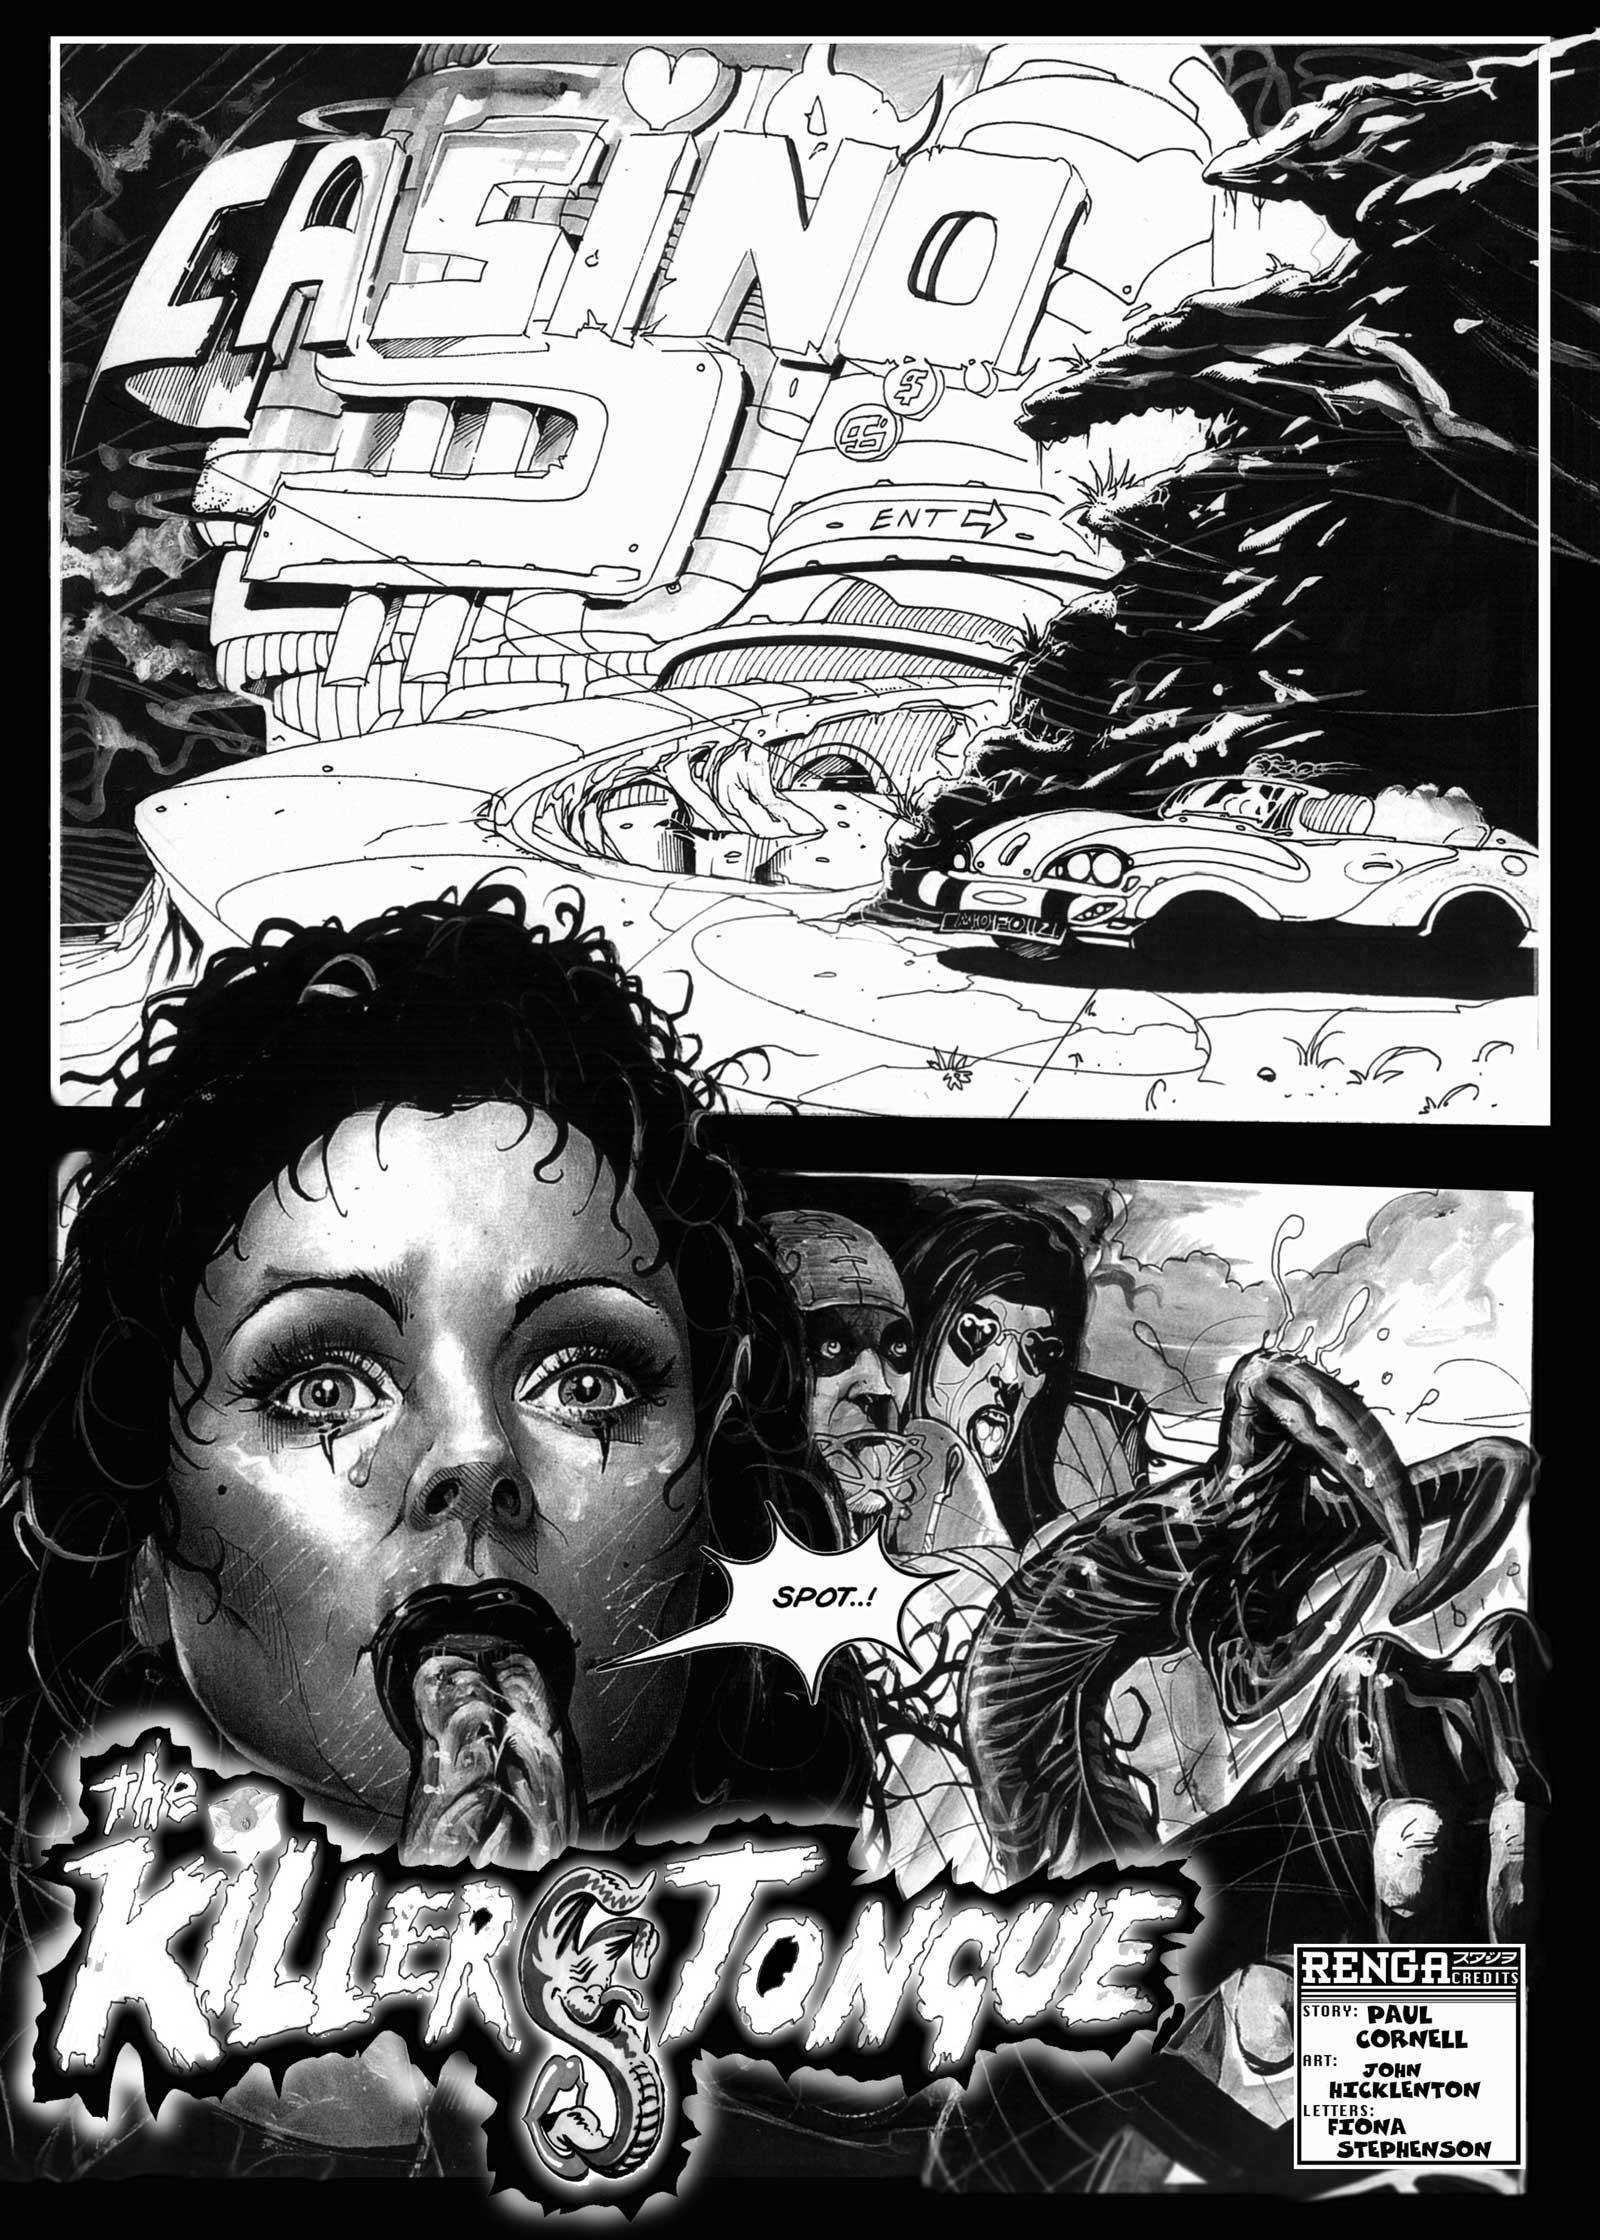 "Killer Tongue", written by Paul Cornell and drawn by John Hicklenton